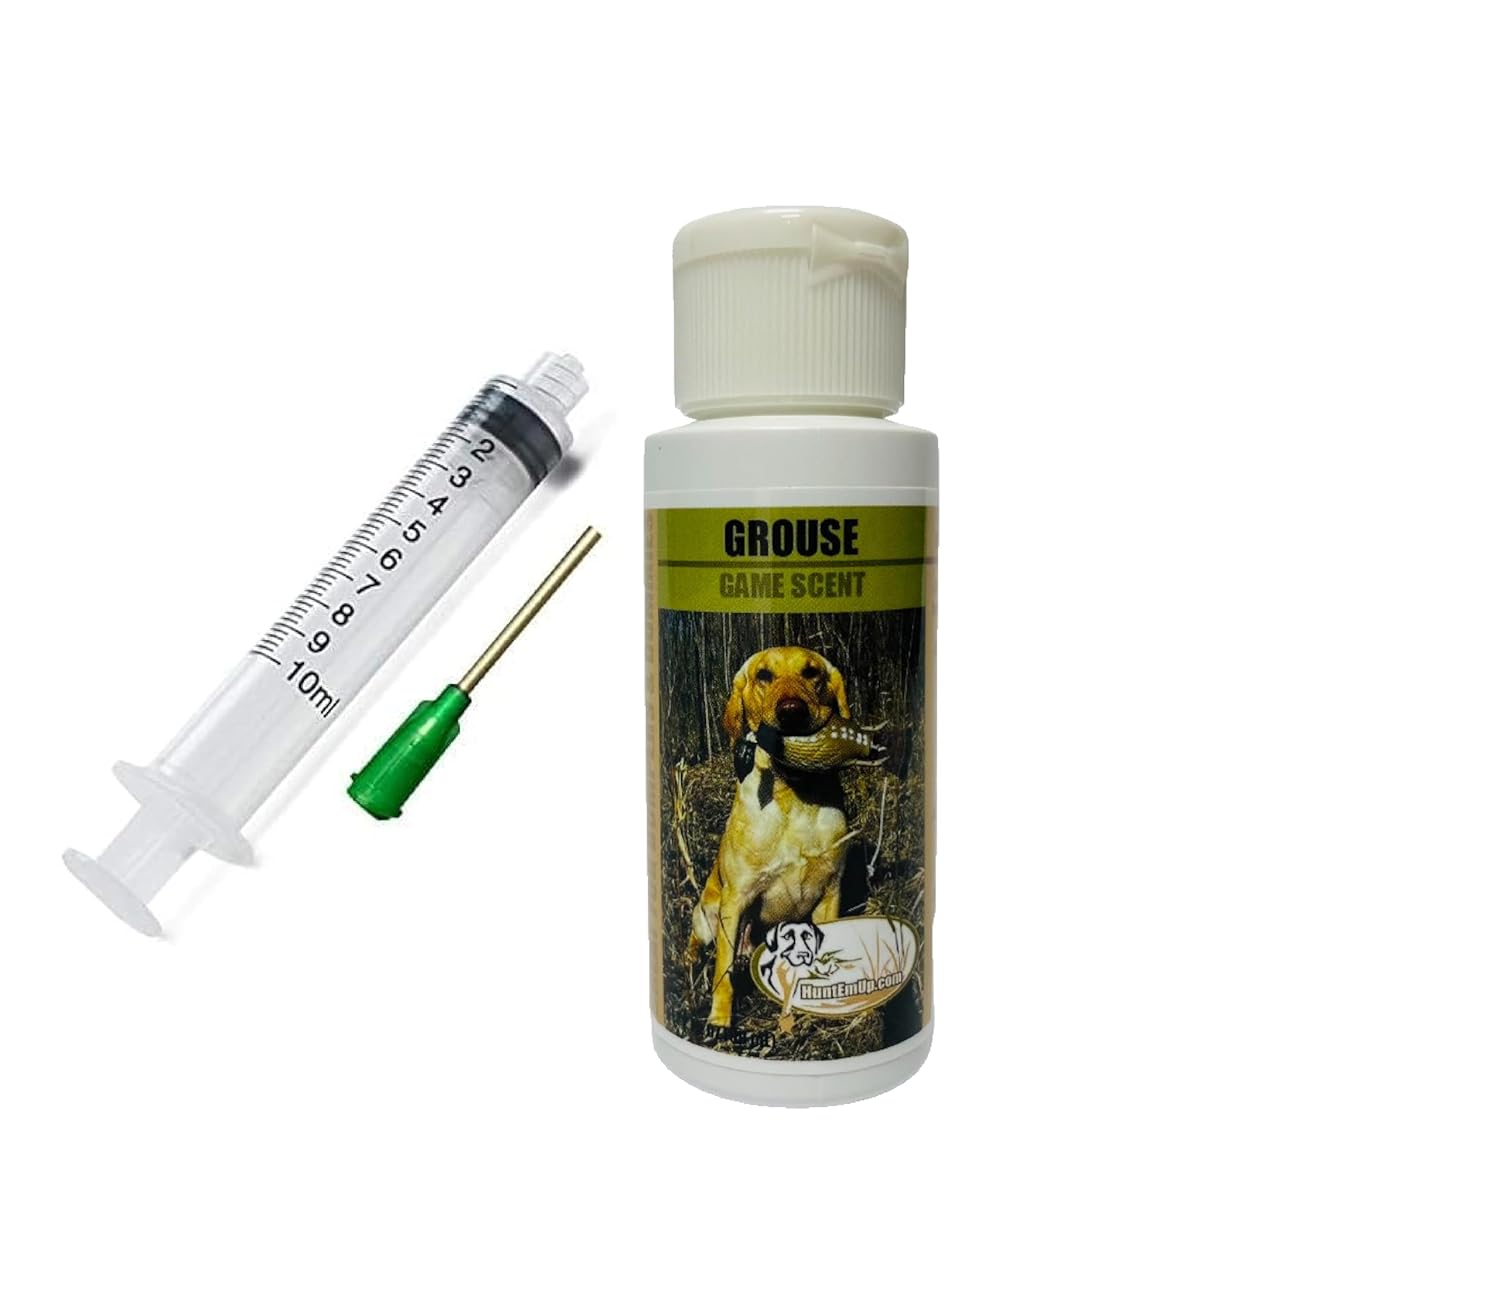 Introducing the HuntEmUp Grouse Dog Training Scent Kit! This premium training scent is a game-changer